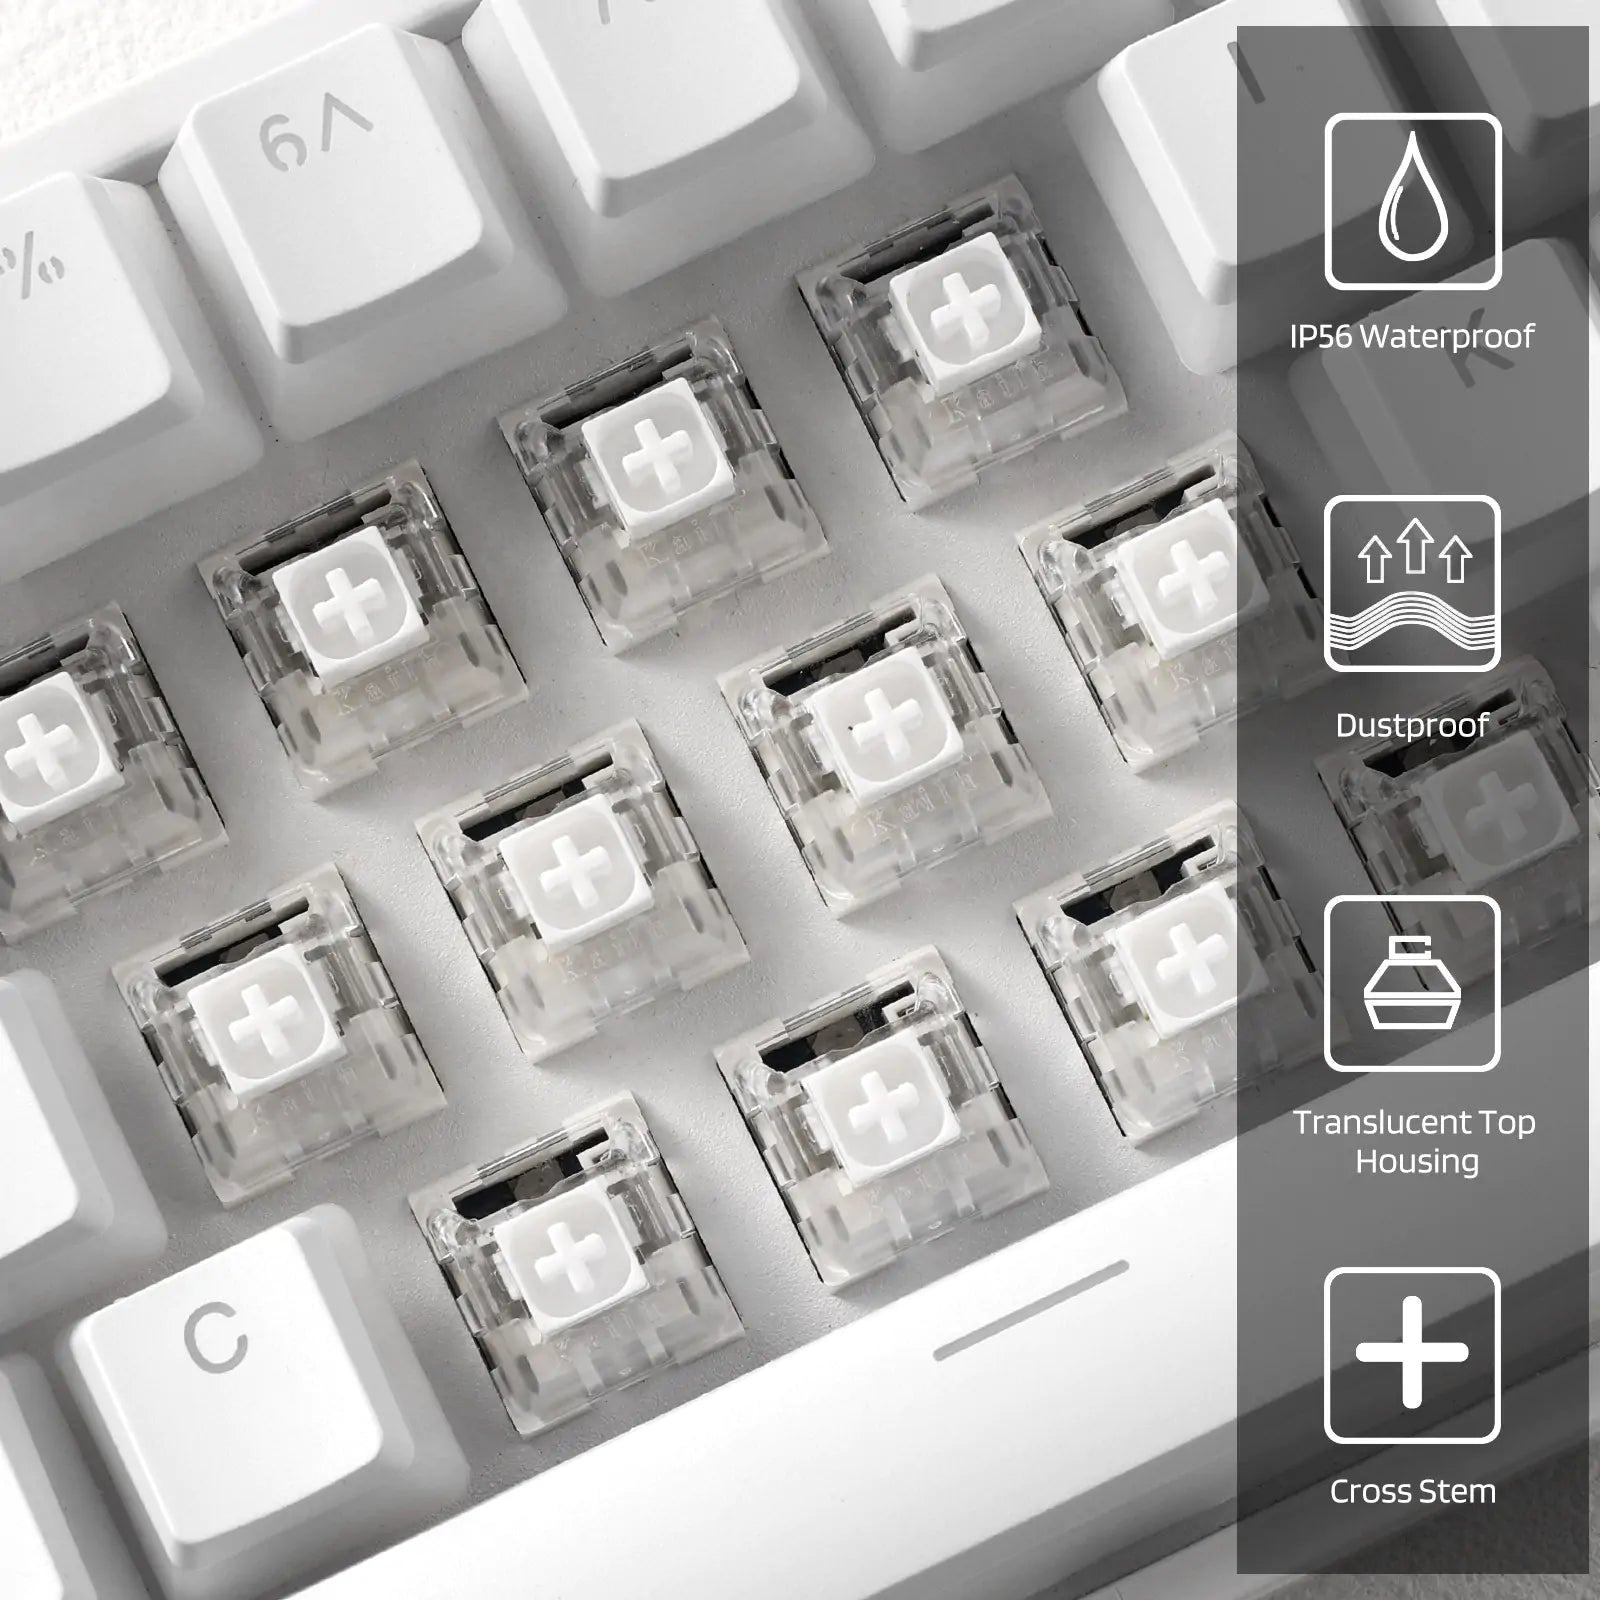 Kailh x LTC Box Switches White for Mechanical Gaming Keyboard DIY, 3pin Clicky RGB/SMD Waterproof MX Stem Switches with Switch Puller(30 Pcs, White)